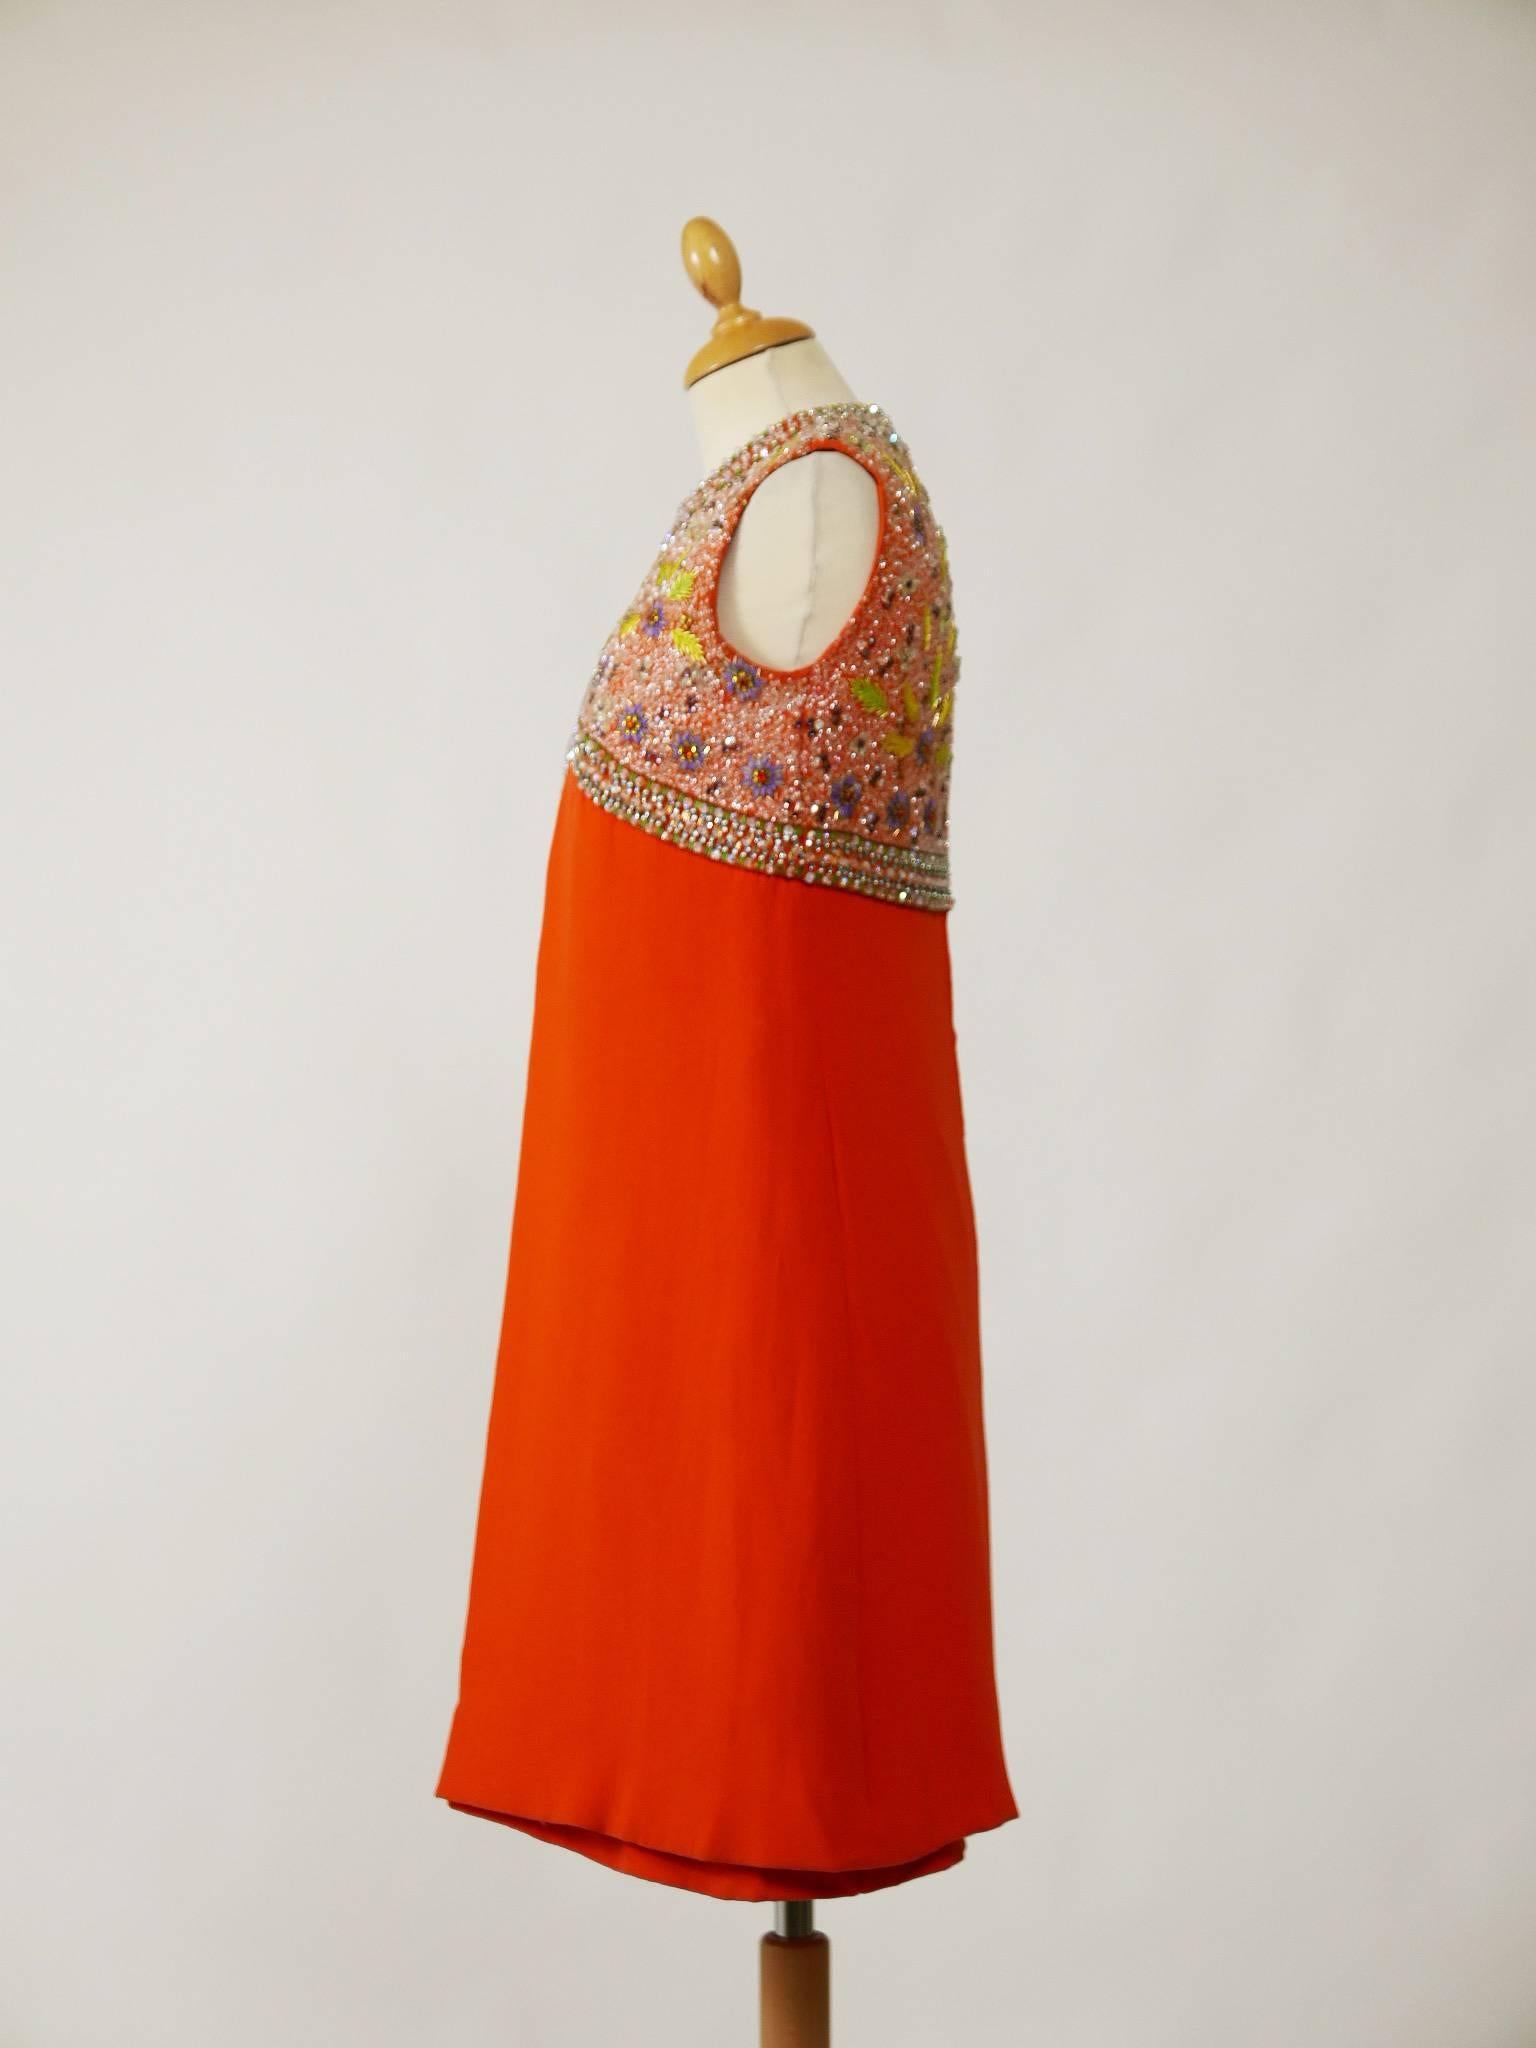 This amazing 1960s mod dress set is in an orange silk fabric with fabulous beaded embroidered. It has sleeveless two pieces dress with back zip closure. It's fully lined. 

Very good vintage condition

Label: N/A
Fabric: Silk/beadeds
Color: